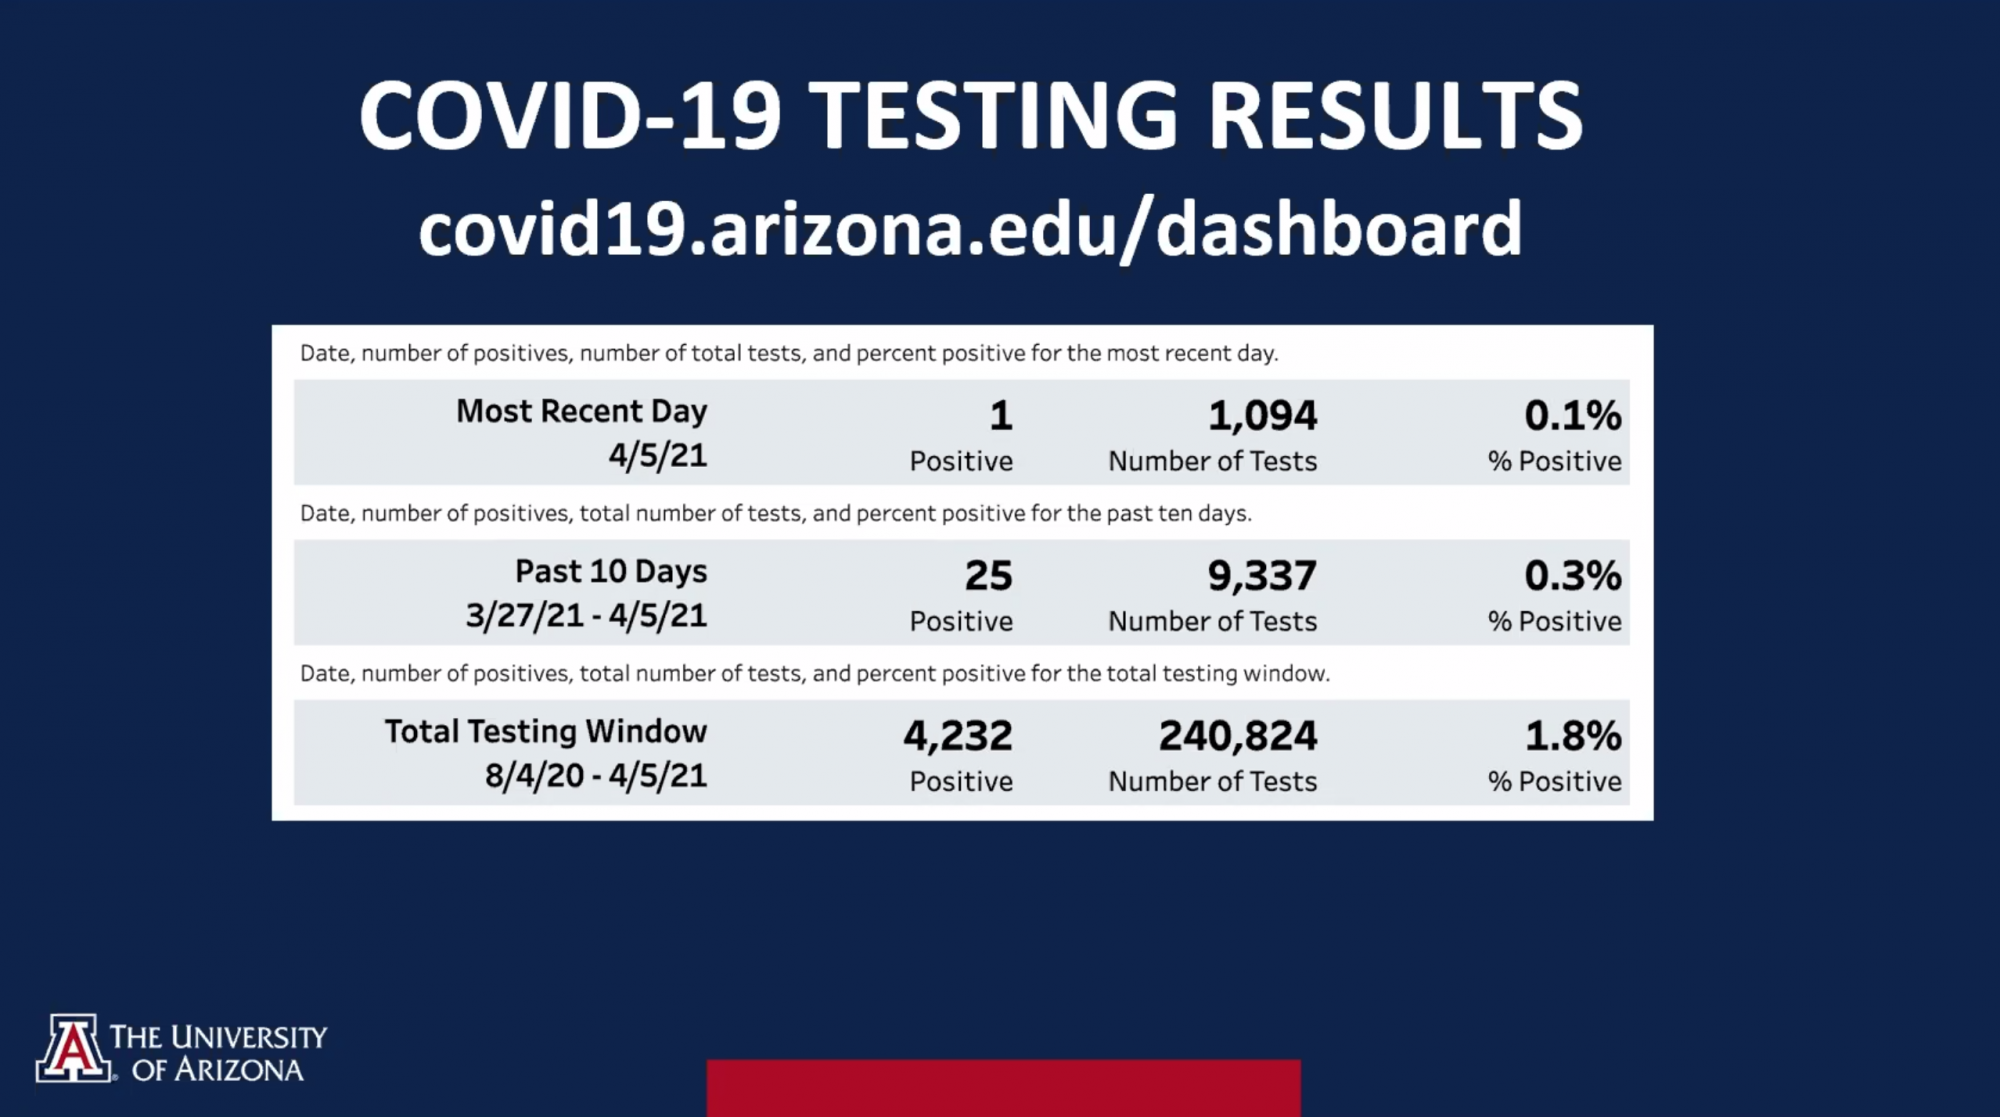 Screenshot of recent COVID-19 testing data results, which indicated a positivity rate of 0.3%.